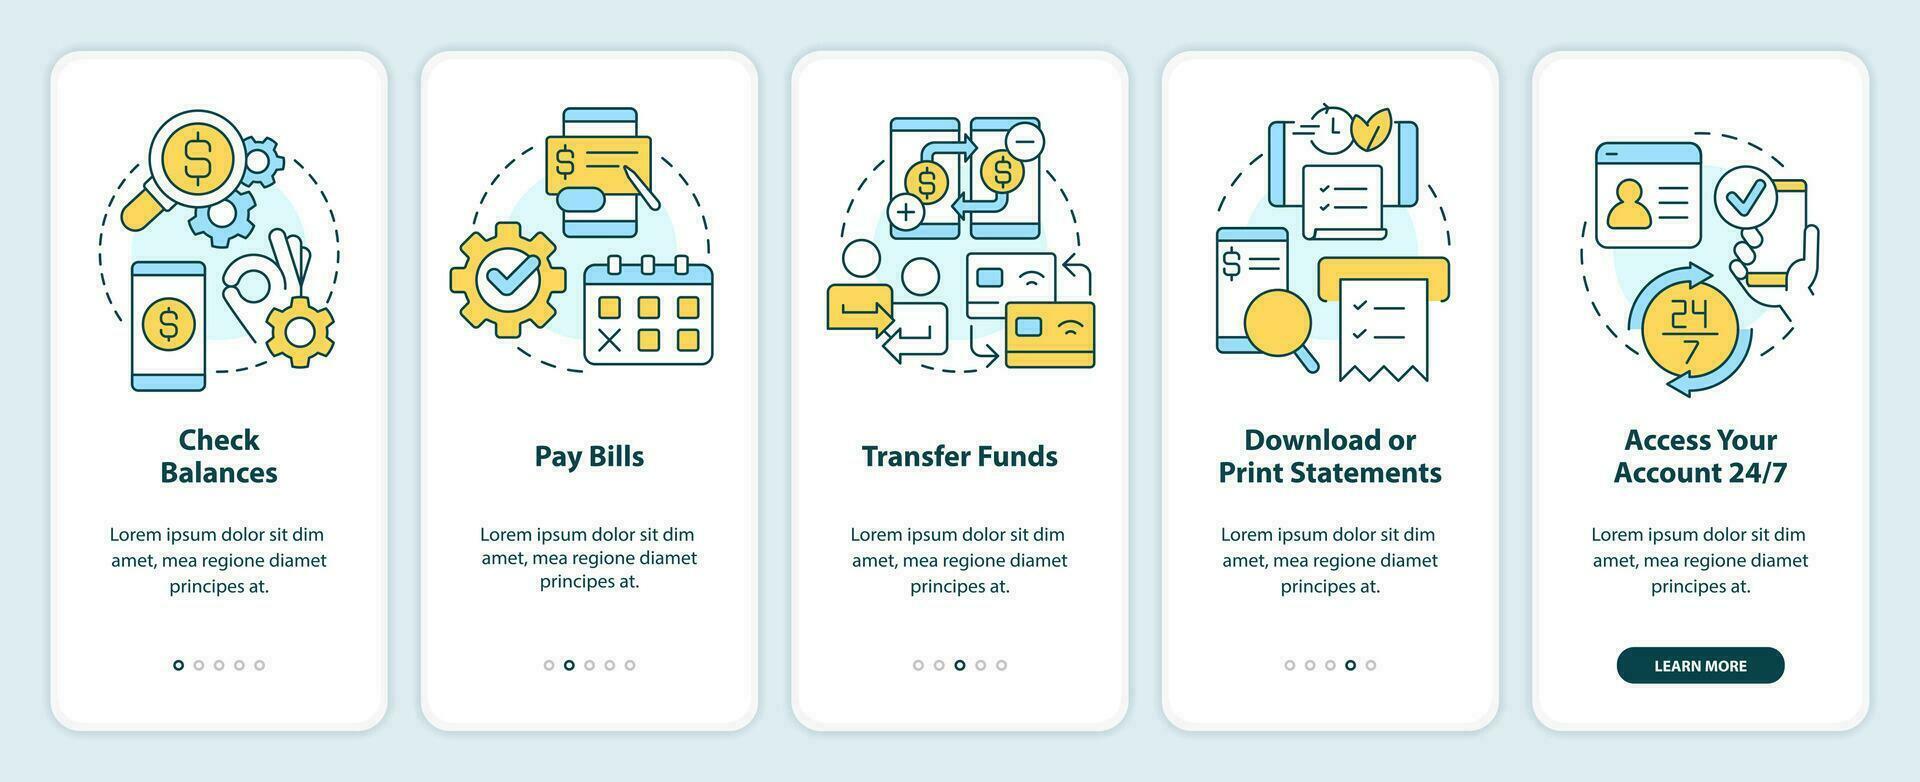 Online banking benefits onboarding mobile app screen. Digital wallet walkthrough 5 steps editable graphic instructions with linear concepts. UI, UX, GUI template vector